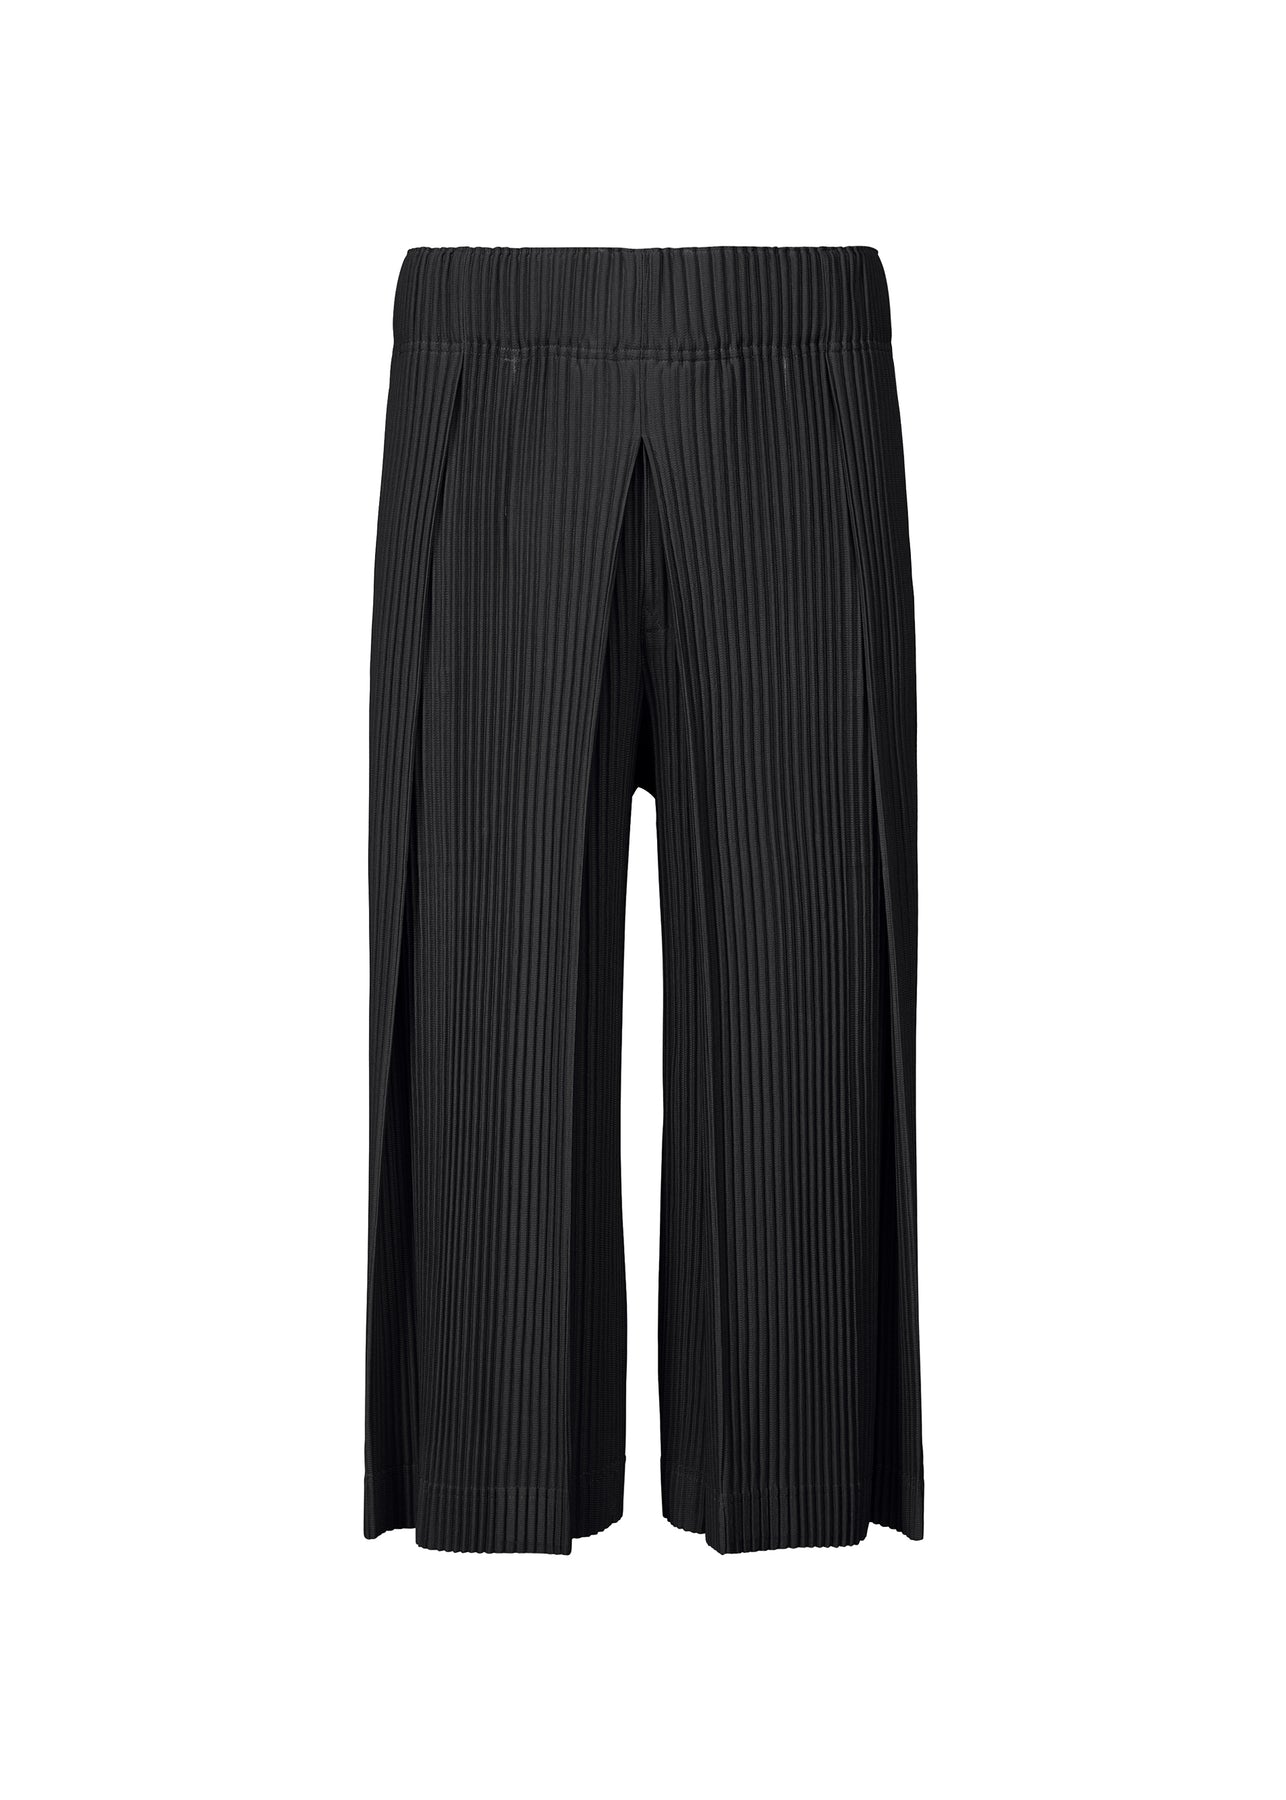 PLEATS | PANTS USA | MIYAKE ISSEY 1 ONLINE BOTTOMS ISSEY The MIYAKE STORE official